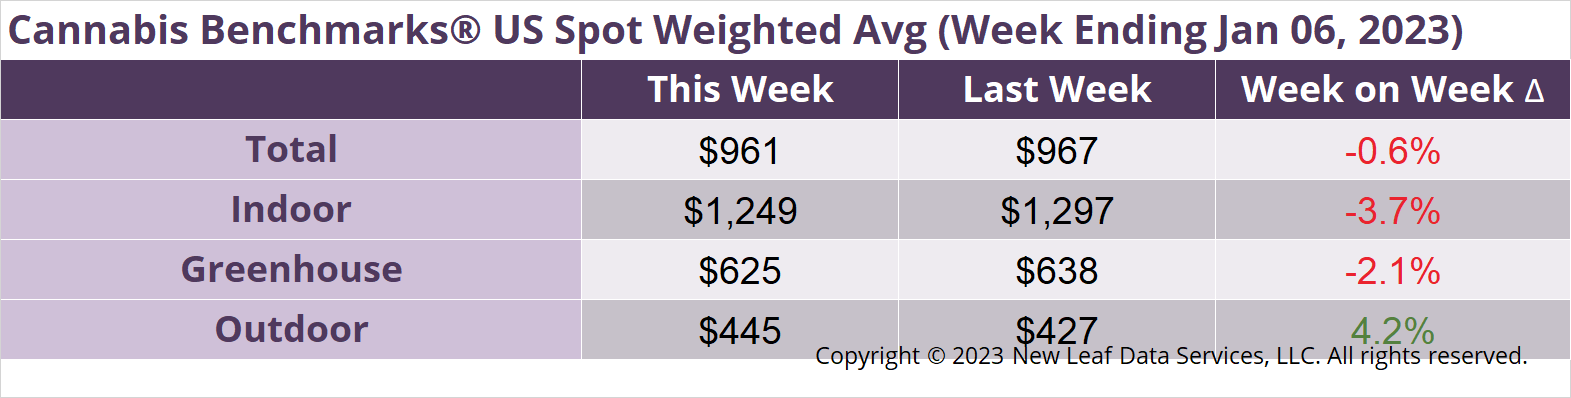 Cannabis Benchmarks U.S. Spot Weighted Average Prices January 6, 2023